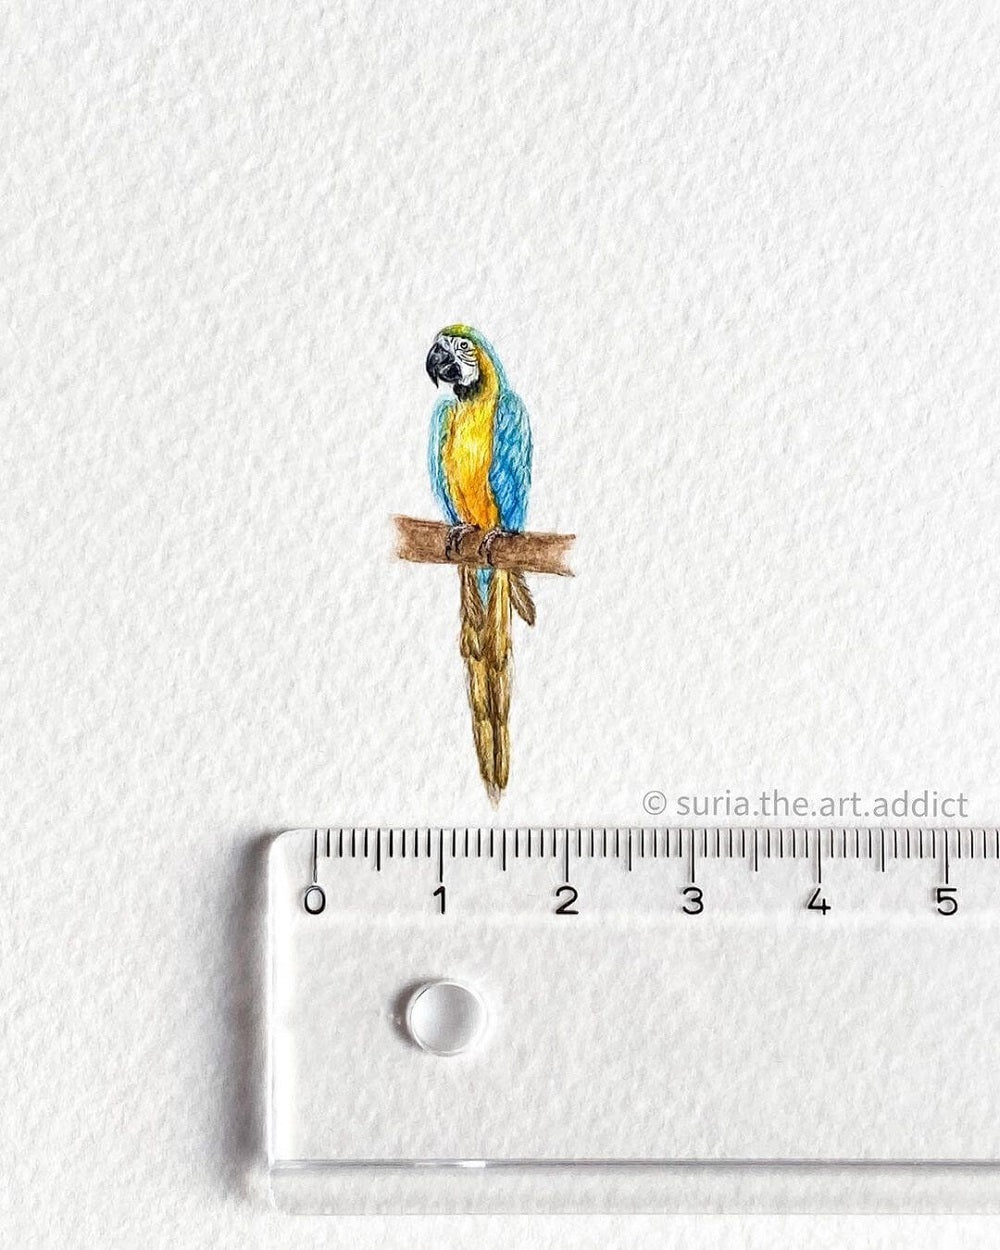 Realistic drawing of a macaw bird painted in watercolour with a ruler underneath to show the drawing measures 2cm.